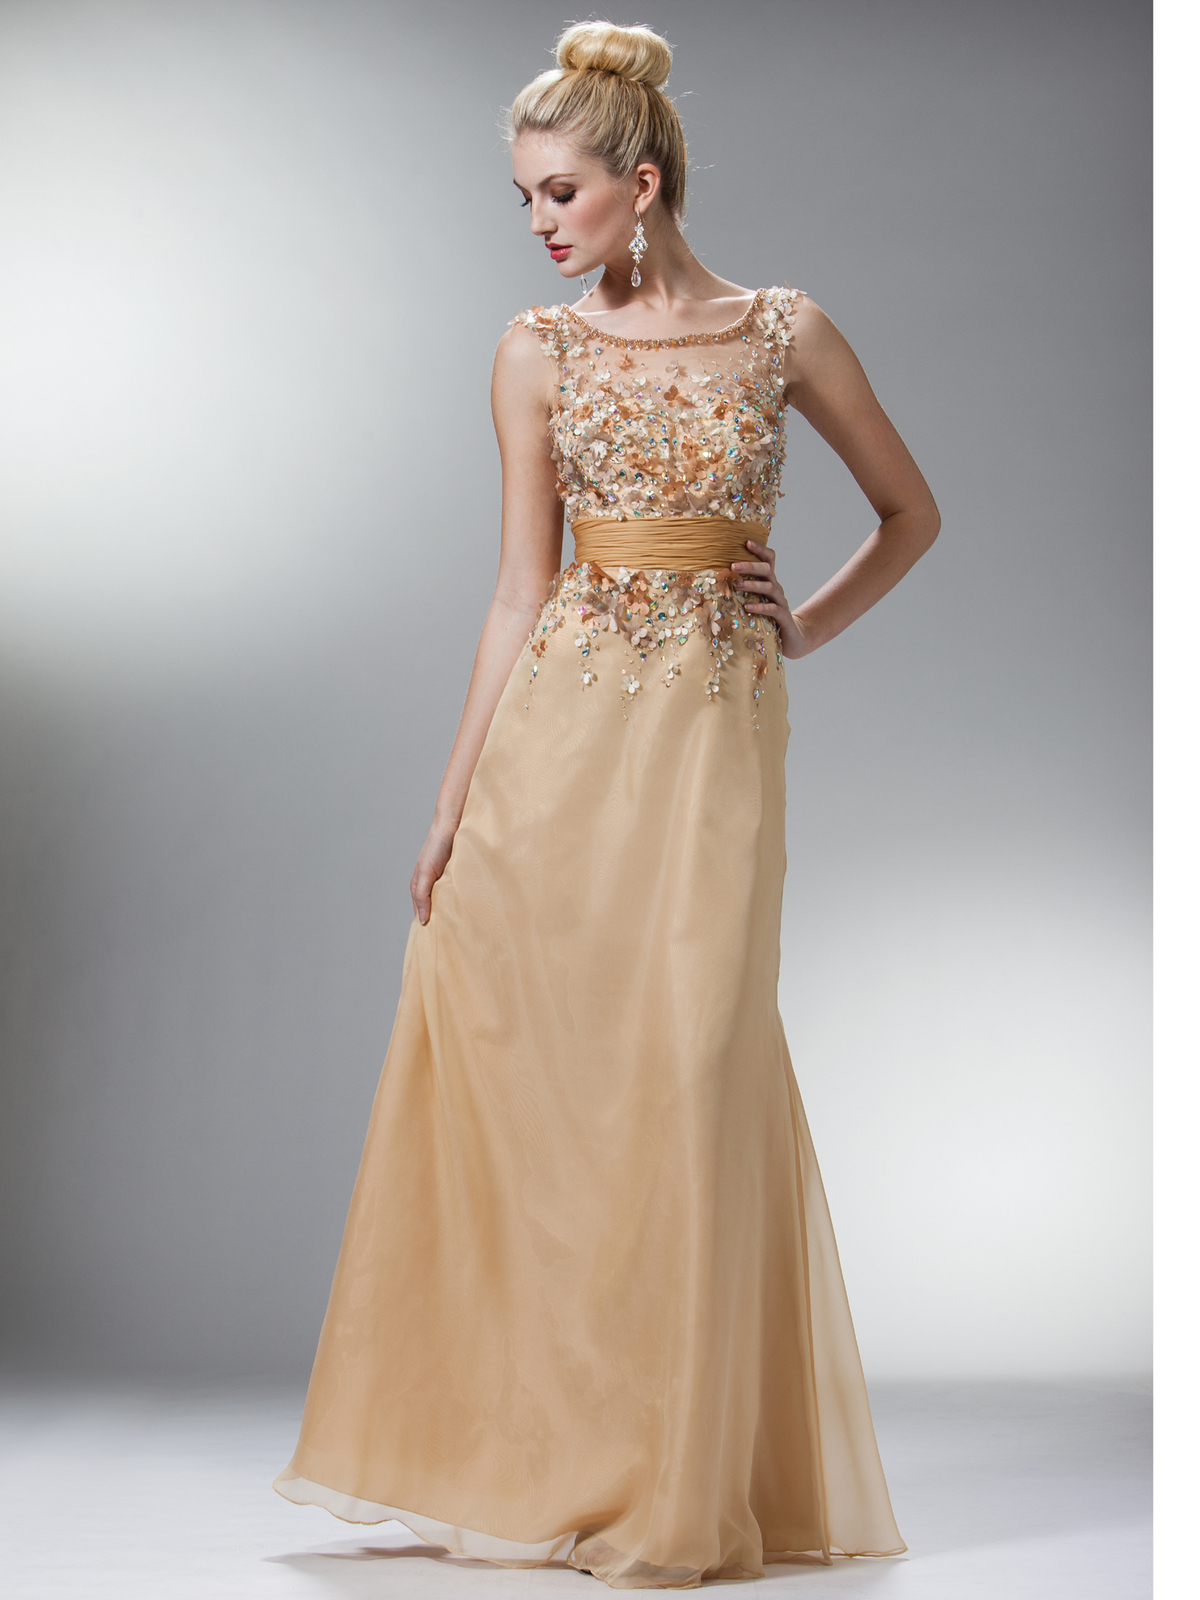 ... inner grace kelly in this graceful and glamorous evening dress an a